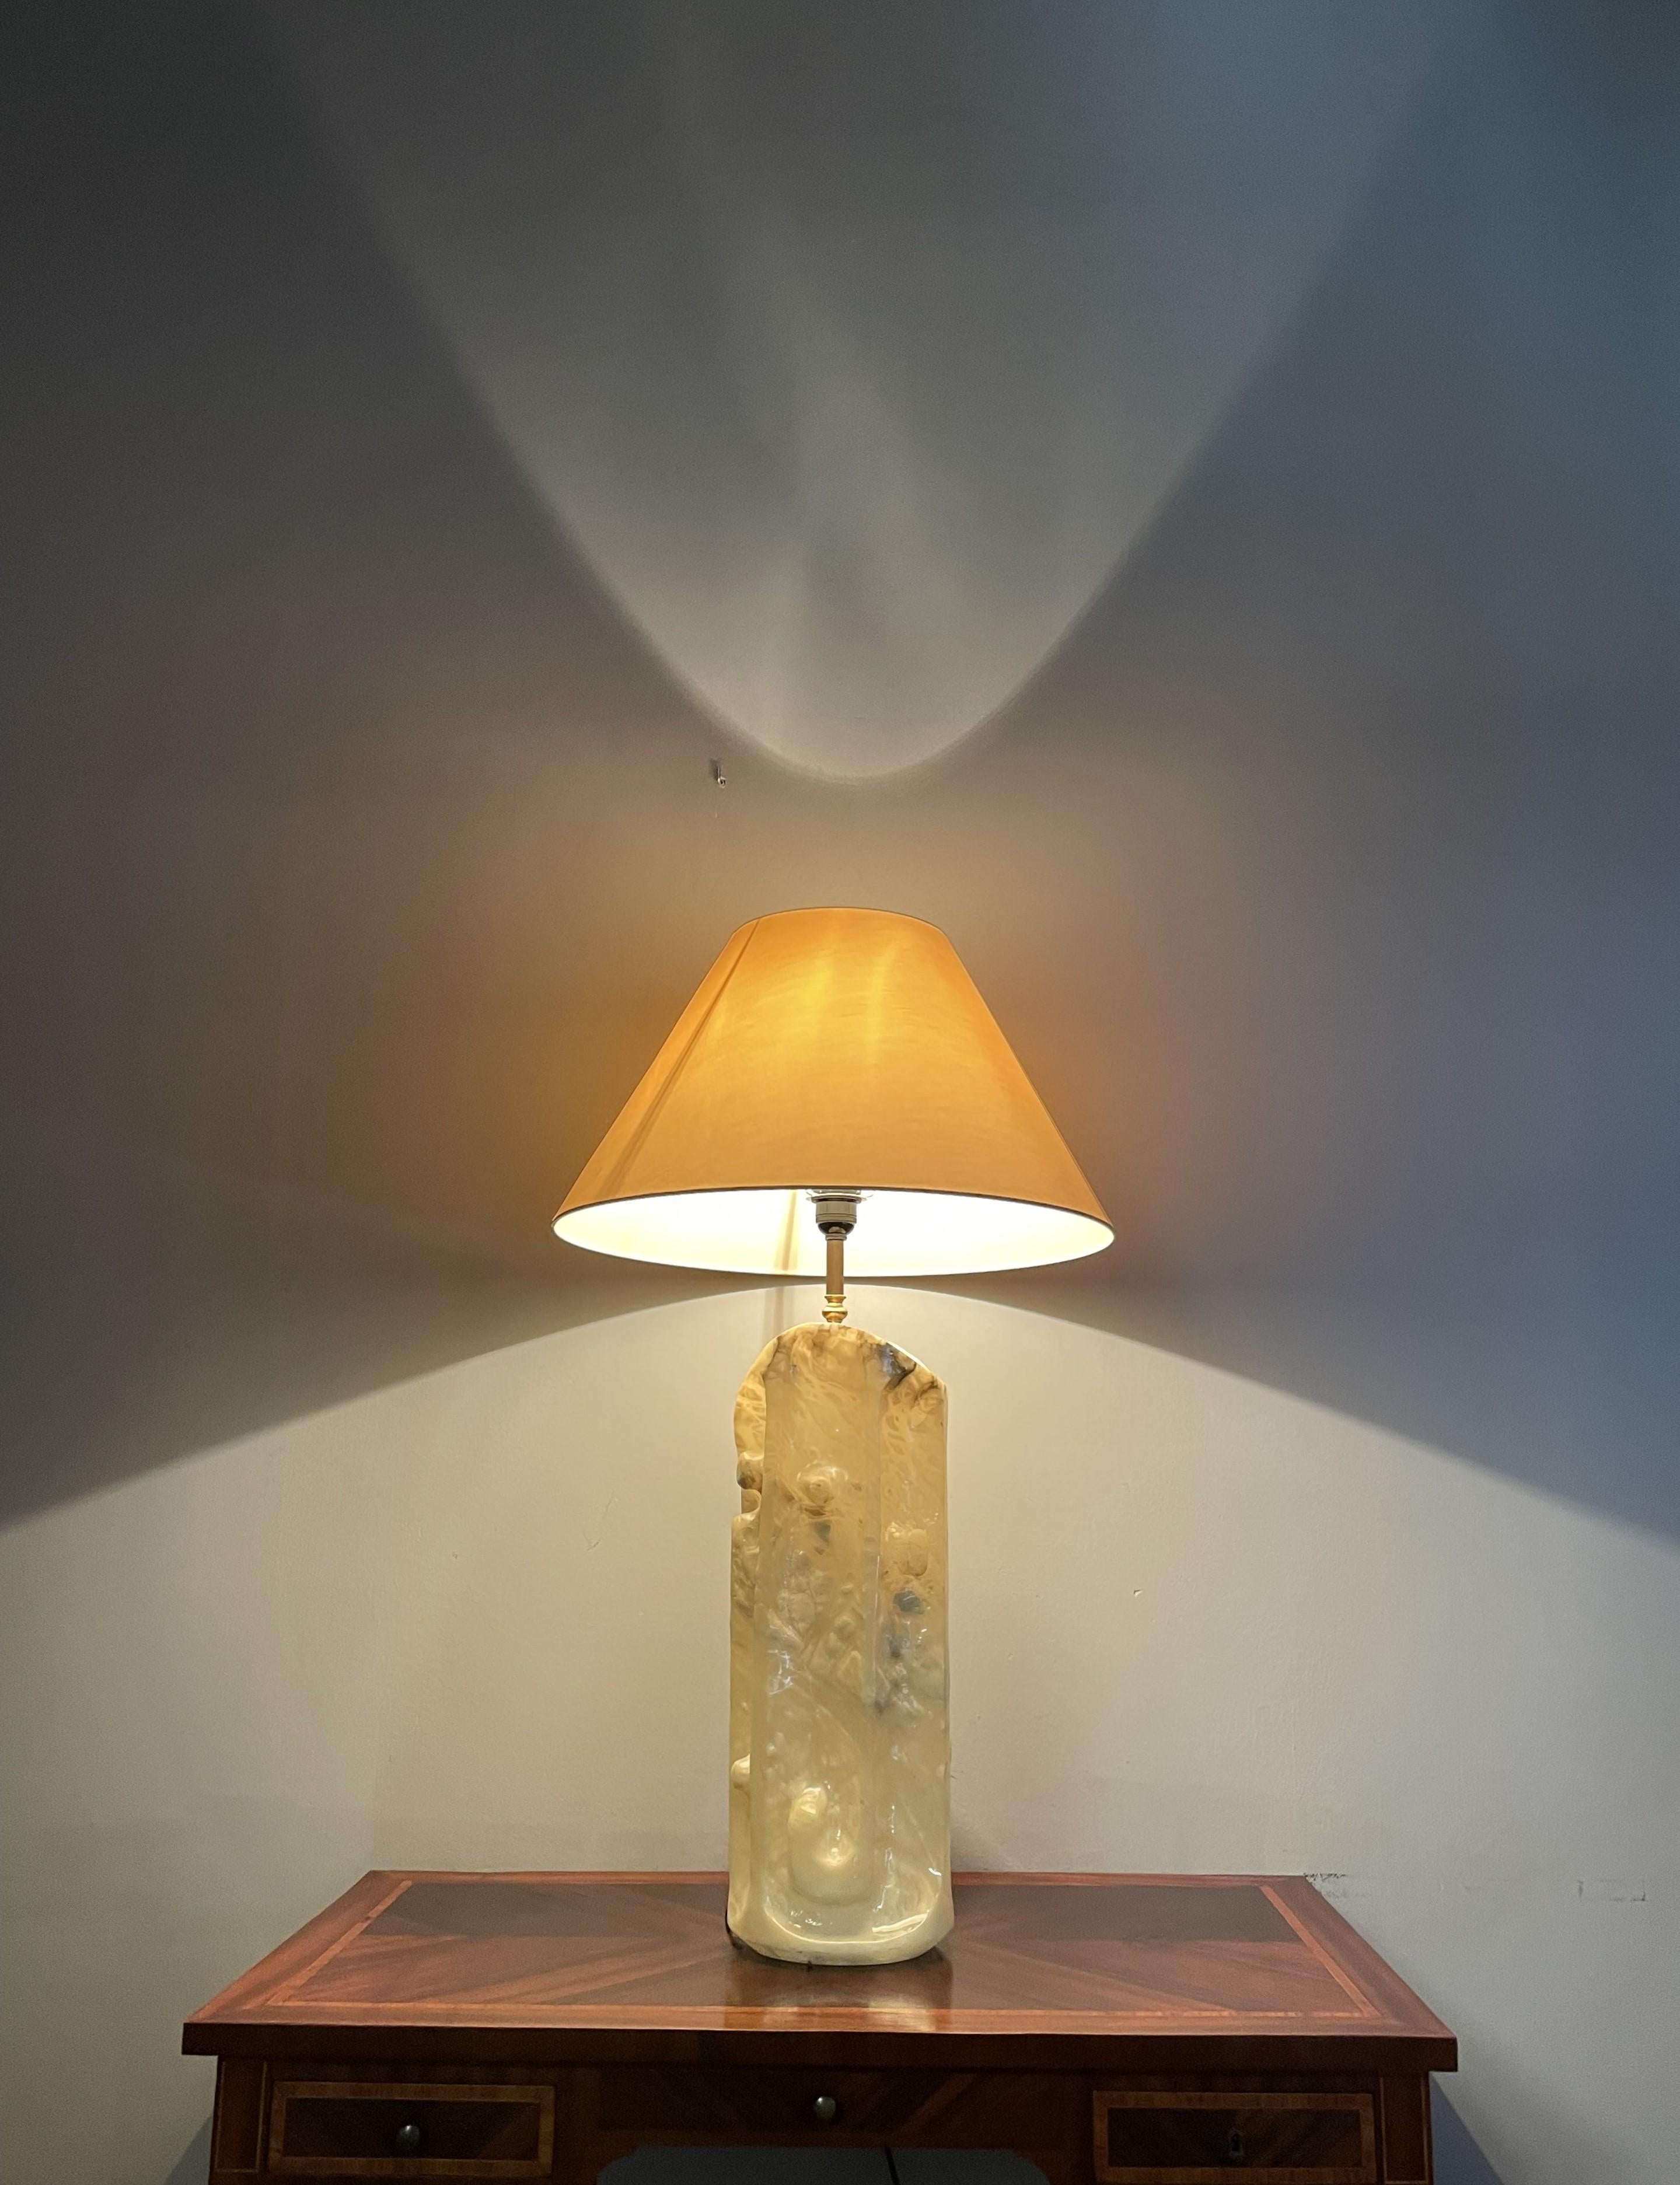 Unique and superb condition, 1950s table lamp.

Both with the light switched on and off, this unique, superbly hand-carved and highly stylish midcentury table or floor lamp is a real stunner. We have said it many times before and even though many of